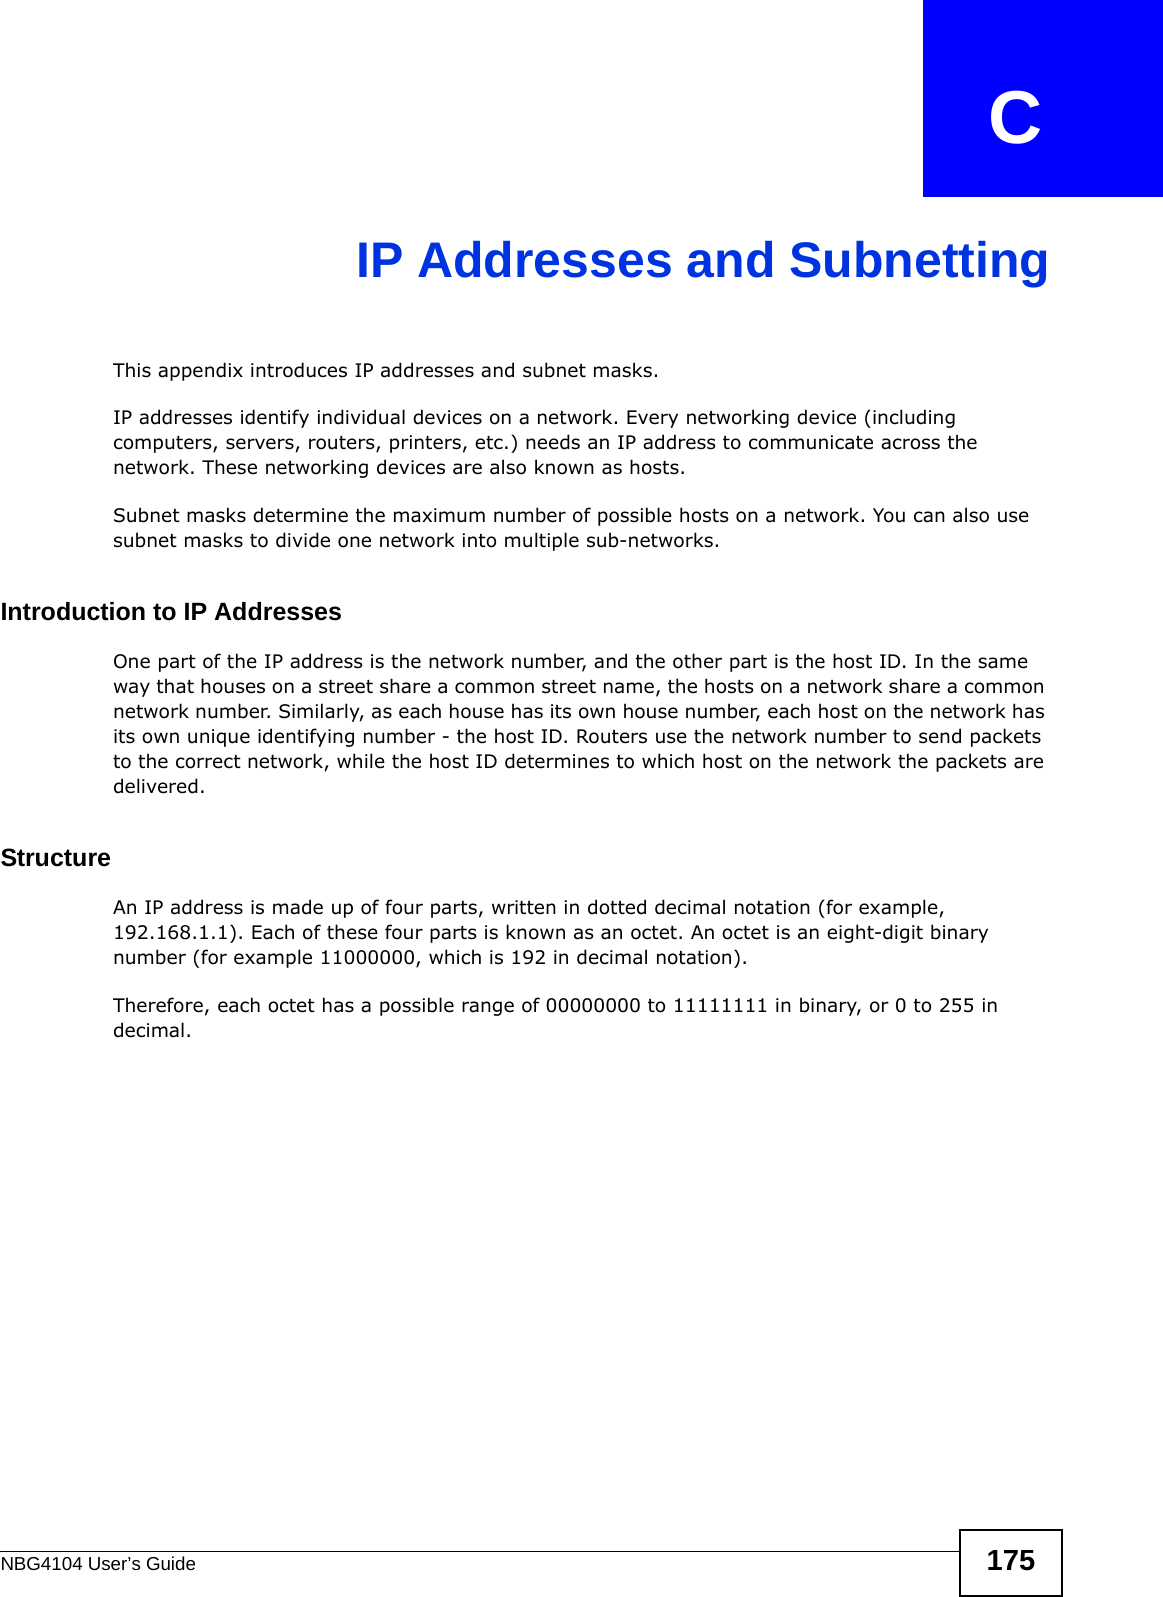 NBG4104 User’s Guide 175APPENDIX   CIP Addresses and SubnettingThis appendix introduces IP addresses and subnet masks. IP addresses identify individual devices on a network. Every networking device (including computers, servers, routers, printers, etc.) needs an IP address to communicate across the network. These networking devices are also known as hosts.Subnet masks determine the maximum number of possible hosts on a network. You can also use subnet masks to divide one network into multiple sub-networks.Introduction to IP AddressesOne part of the IP address is the network number, and the other part is the host ID. In the same way that houses on a street share a common street name, the hosts on a network share a common network number. Similarly, as each house has its own house number, each host on the network has its own unique identifying number - the host ID. Routers use the network number to send packets to the correct network, while the host ID determines to which host on the network the packets are delivered.StructureAn IP address is made up of four parts, written in dotted decimal notation (for example, 192.168.1.1). Each of these four parts is known as an octet. An octet is an eight-digit binary number (for example 11000000, which is 192 in decimal notation). Therefore, each octet has a possible range of 00000000 to 11111111 in binary, or 0 to 255 in decimal.